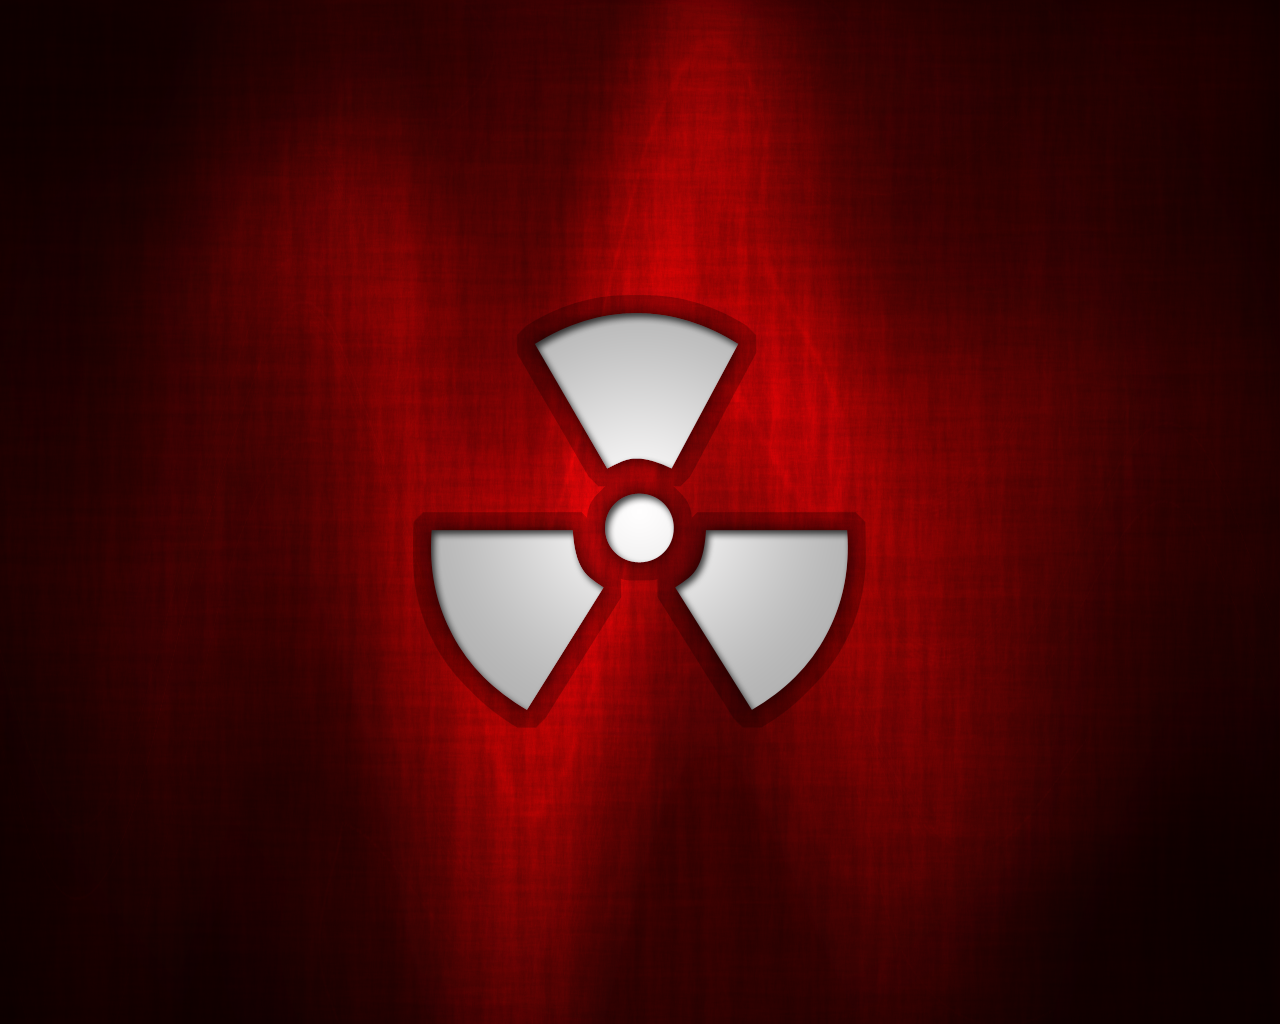 Nuclear Wallpaper by hello 123456 on DeviantArt